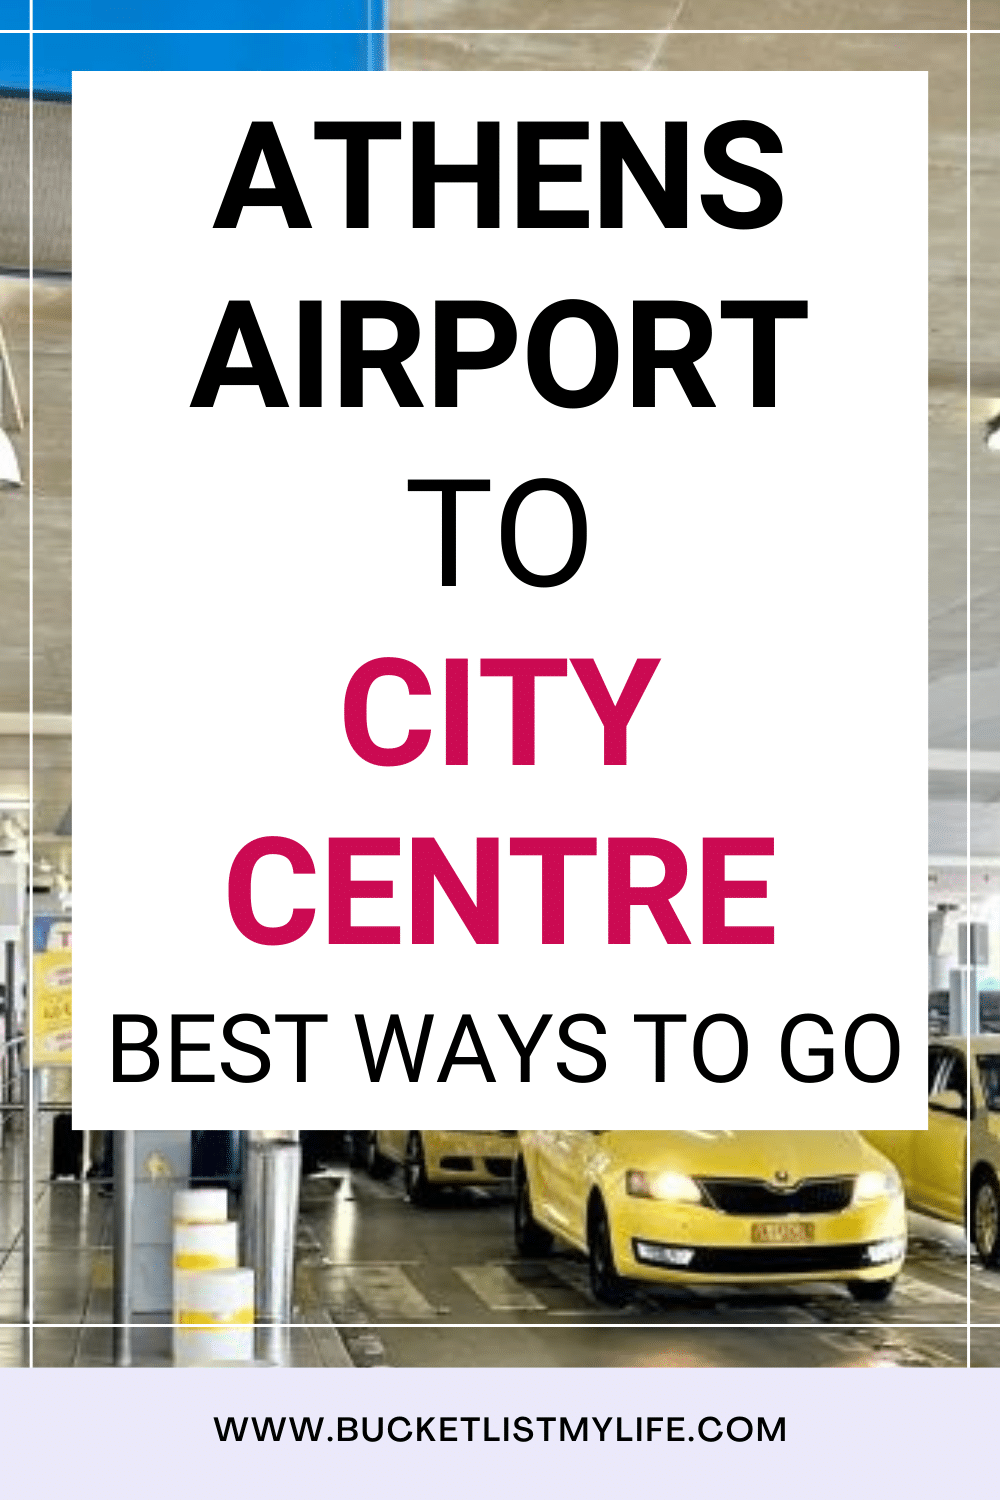 Athens airport to city centre: best ways to go